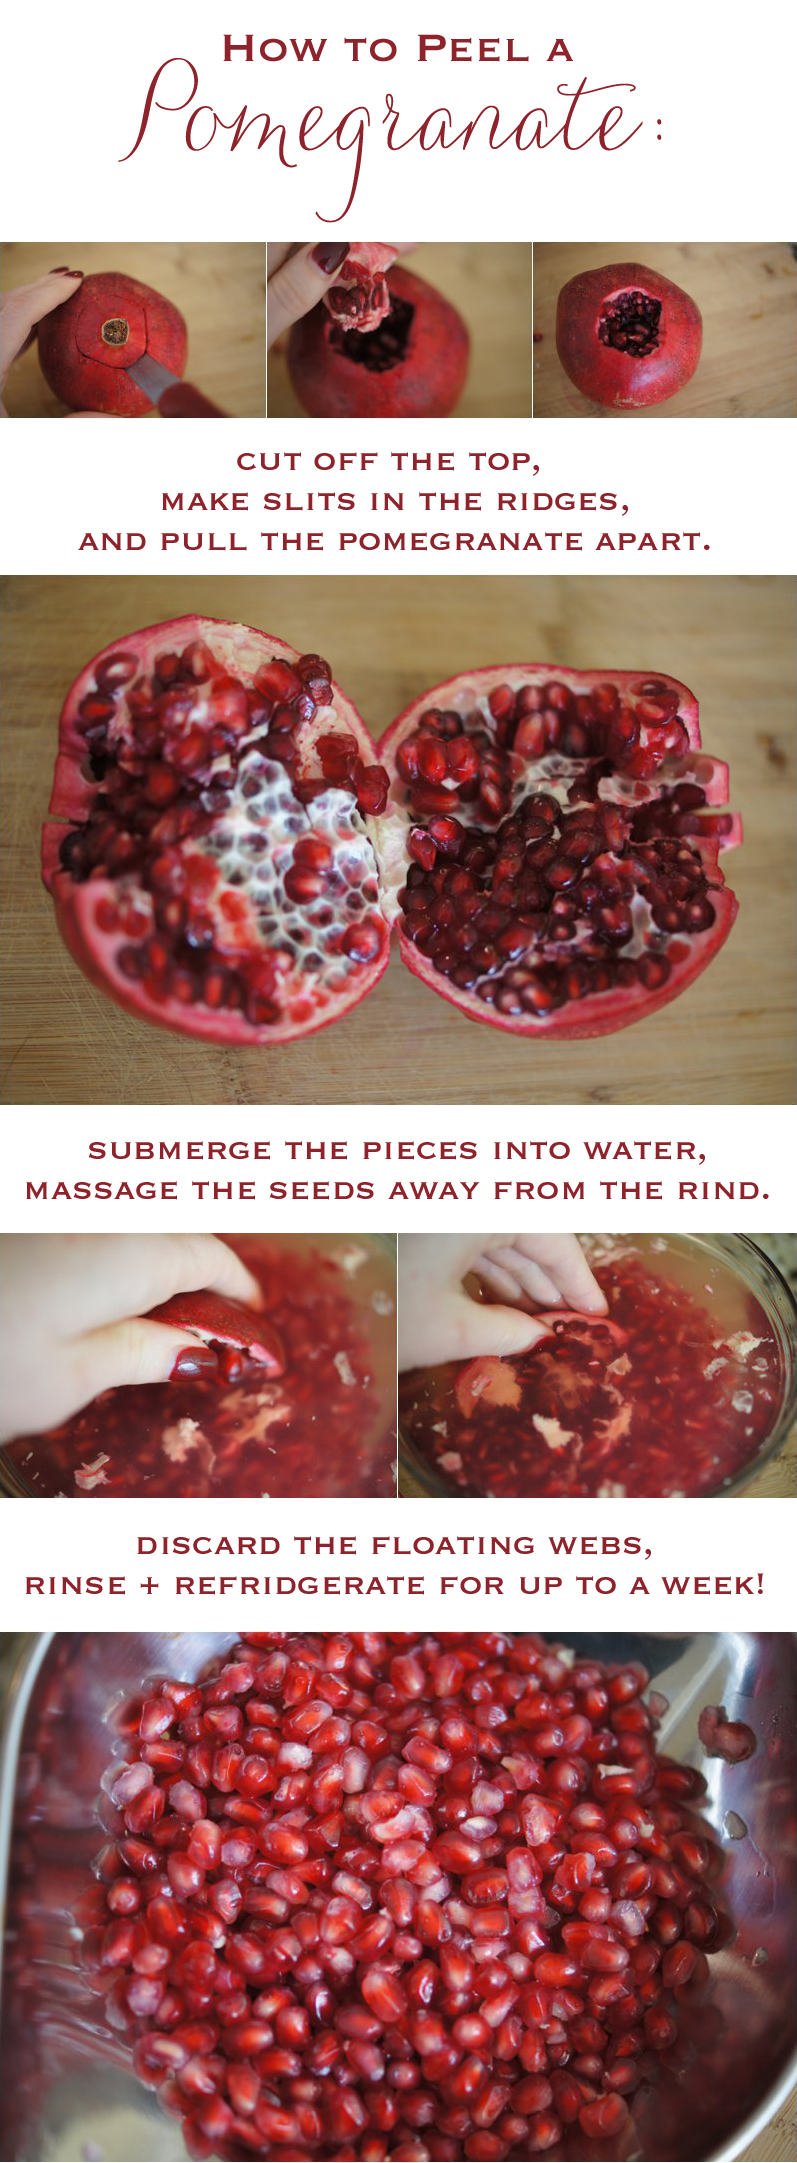 How-to-Peel-a-Pomegranate